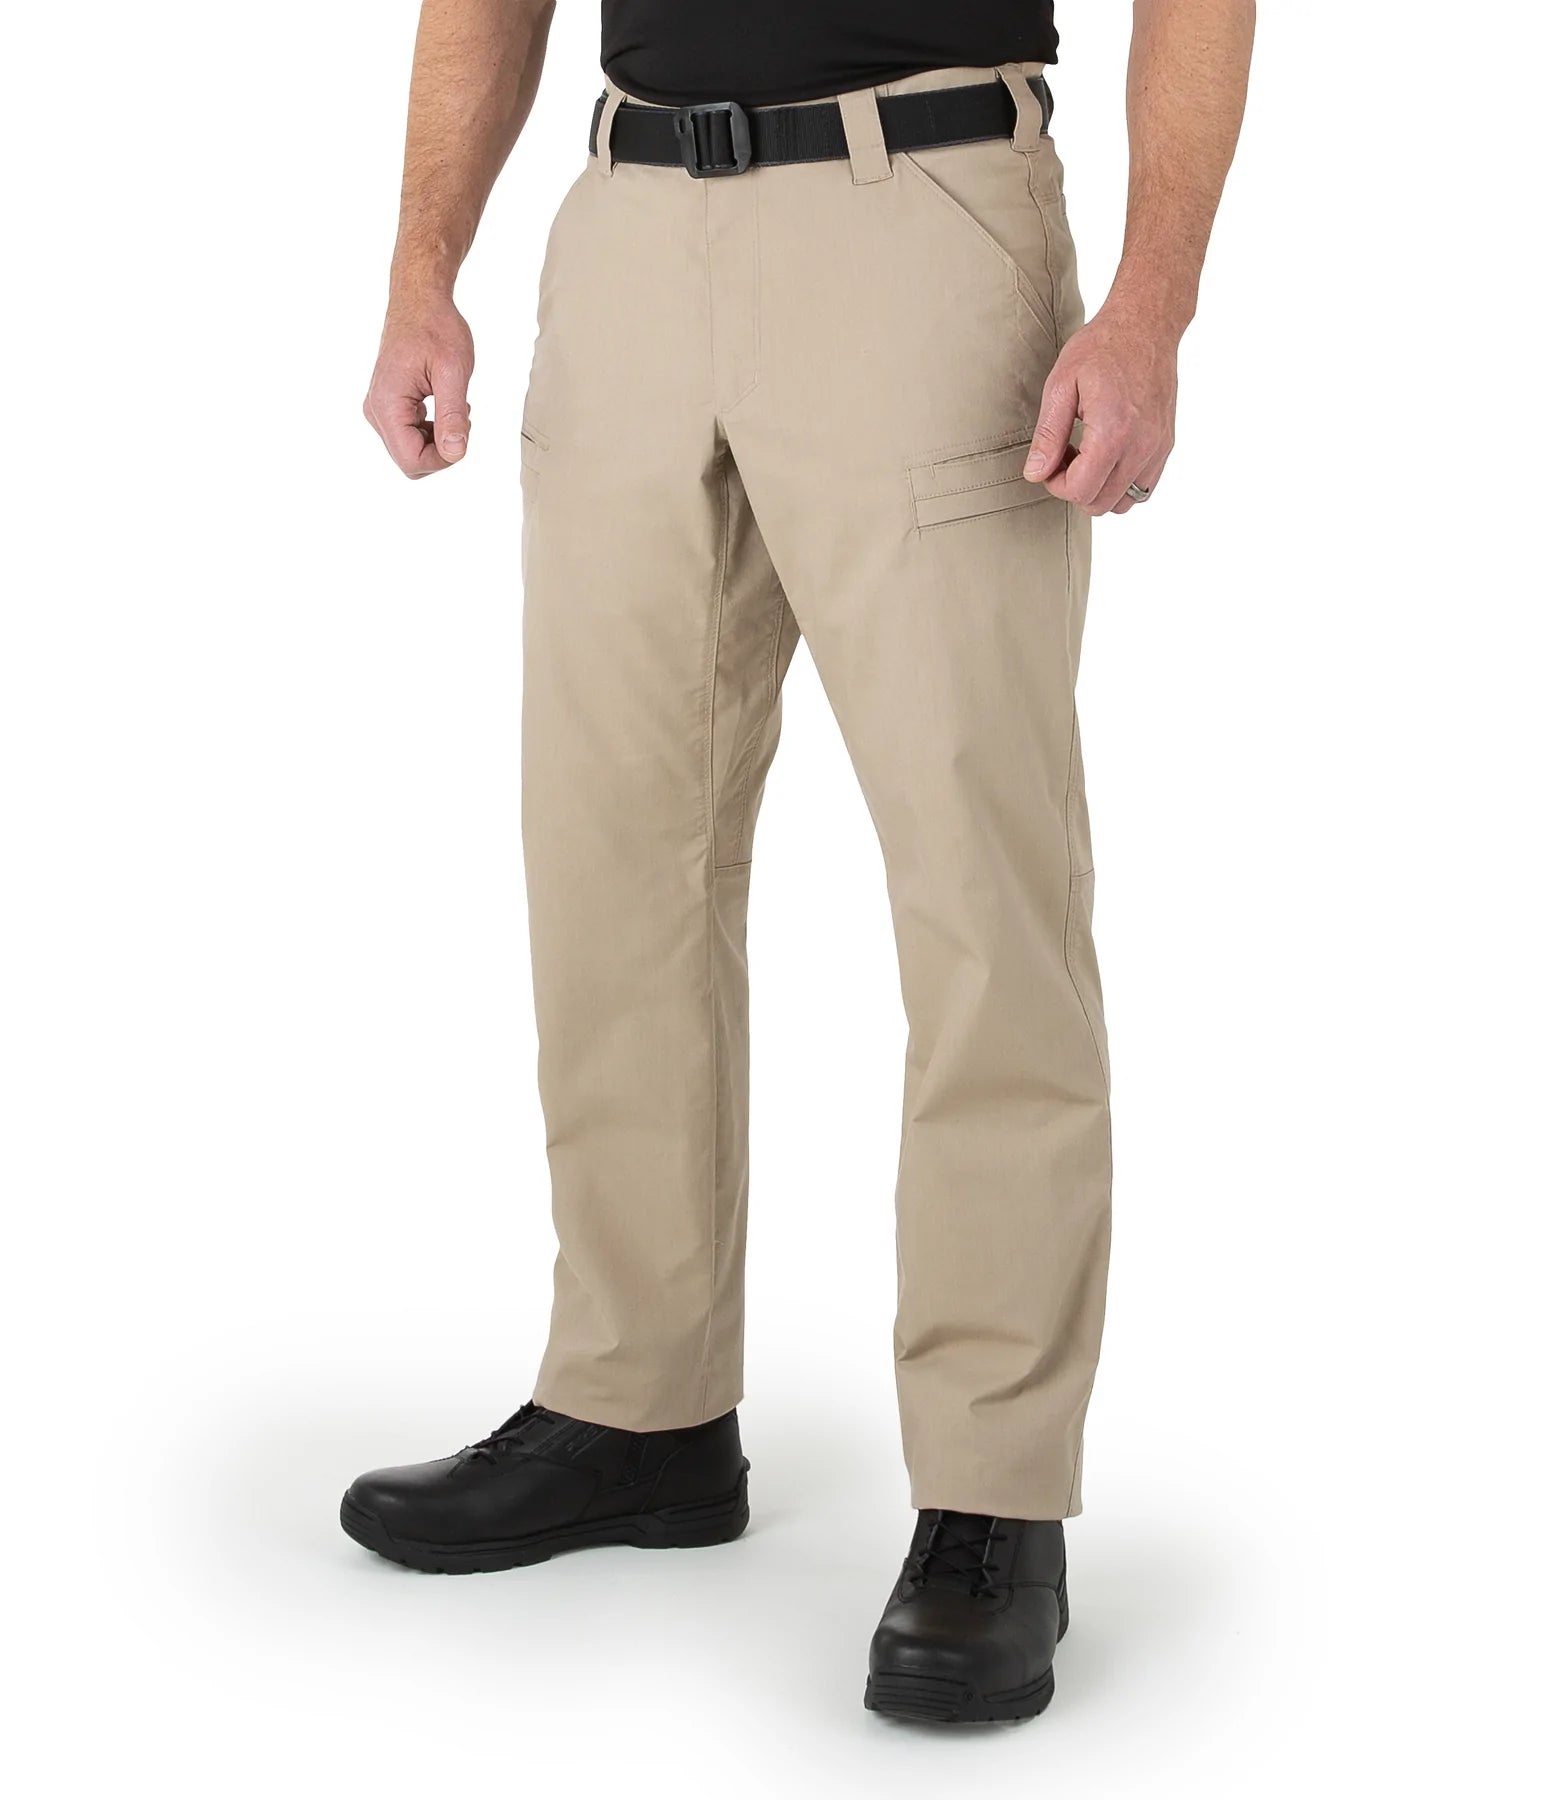 First Tactical Women's A2 Pant (124038) Coyote / Khaki / Dark Navy